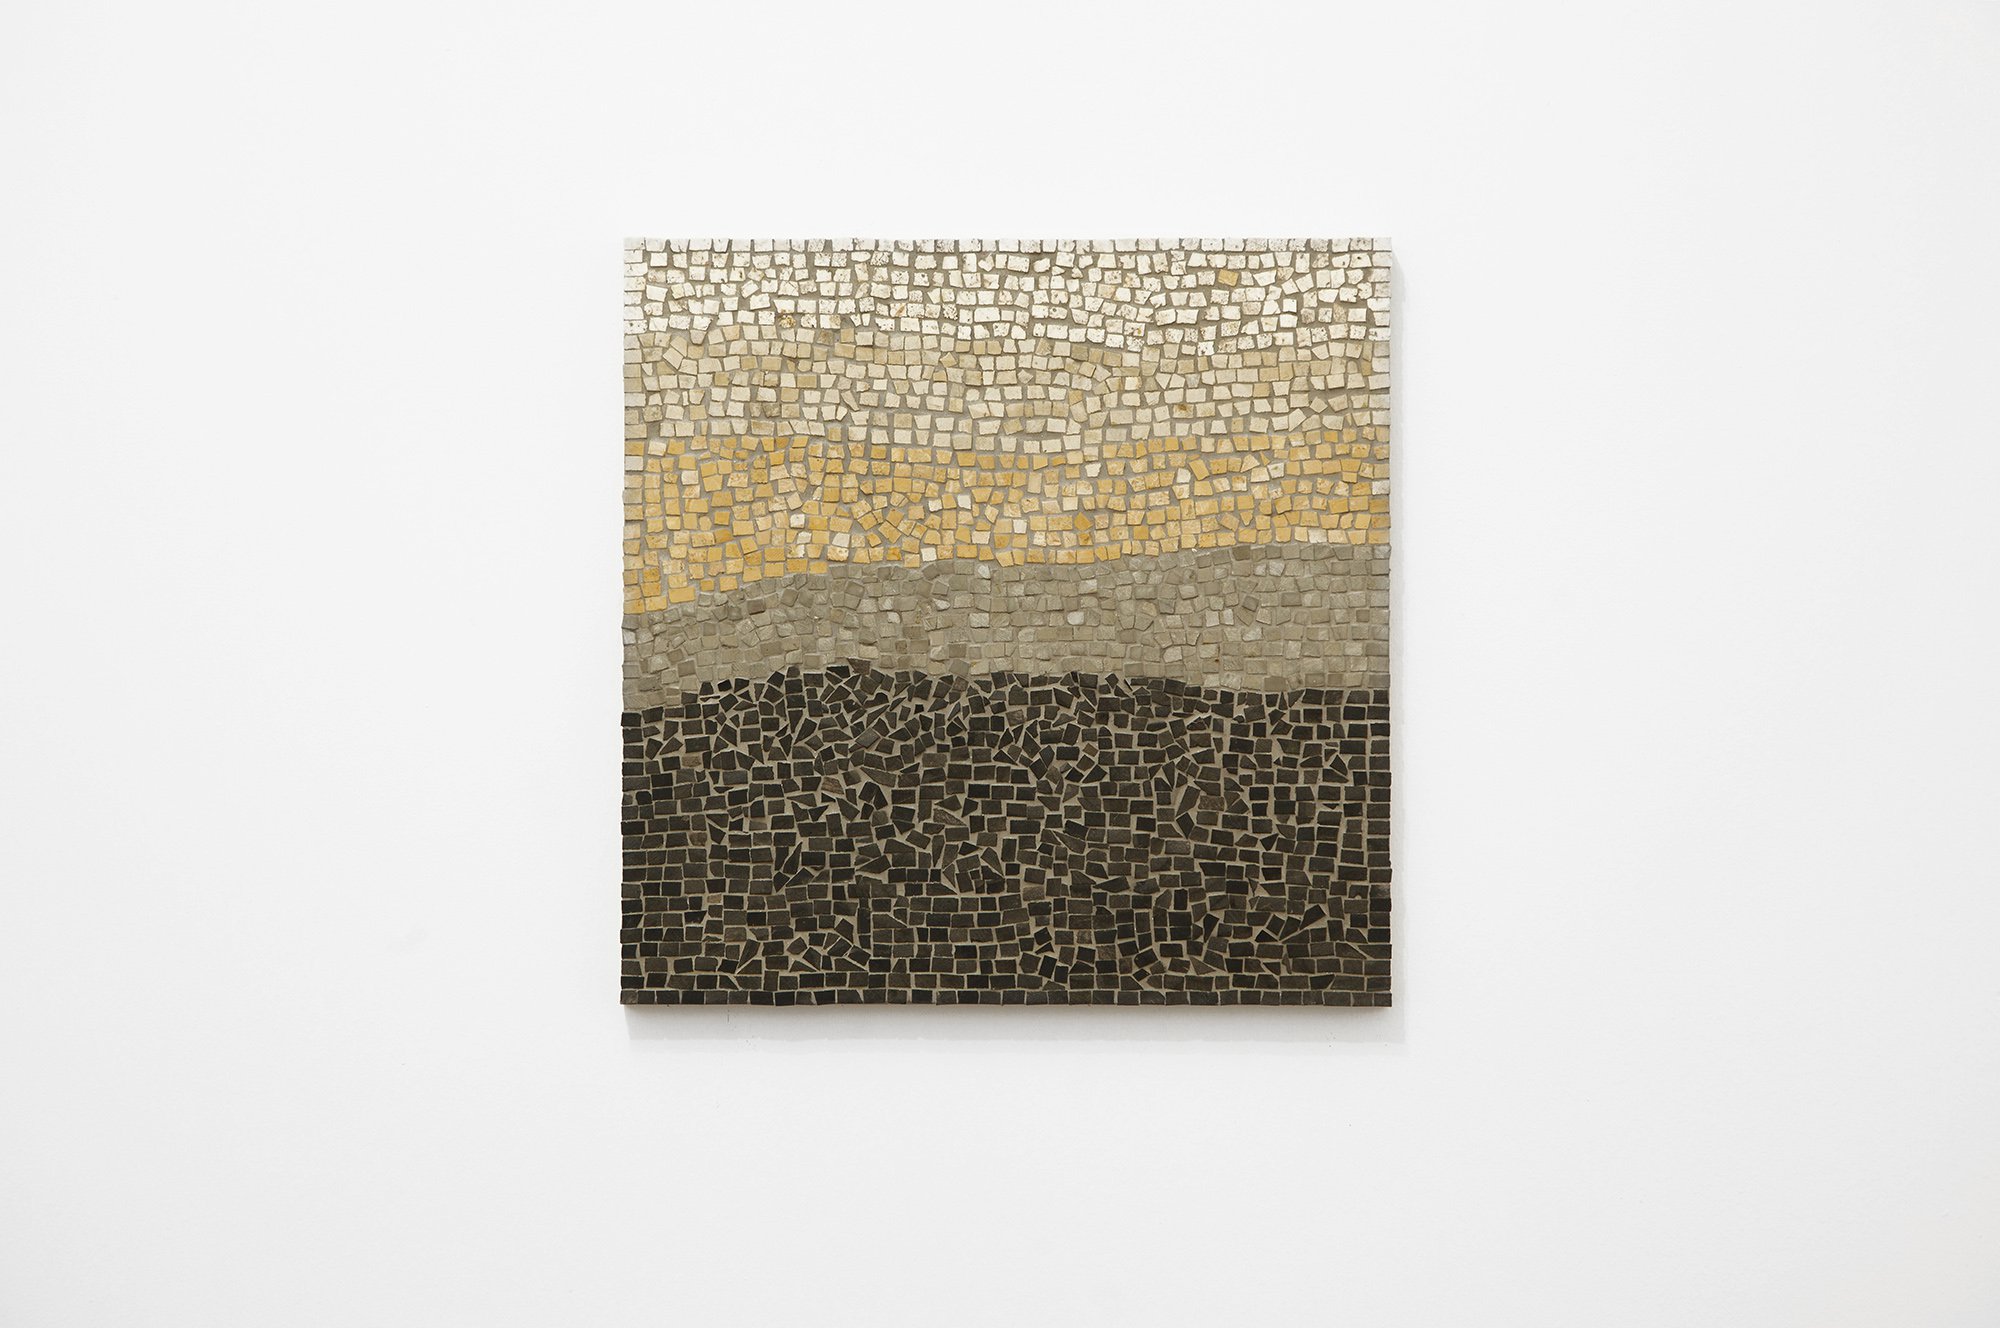 Christodoulos Panayiotou, Untitled, mosaic, natural stones, wooden base, 40 x 40 cm (15 3/4 x 15 3/4 in), 2012